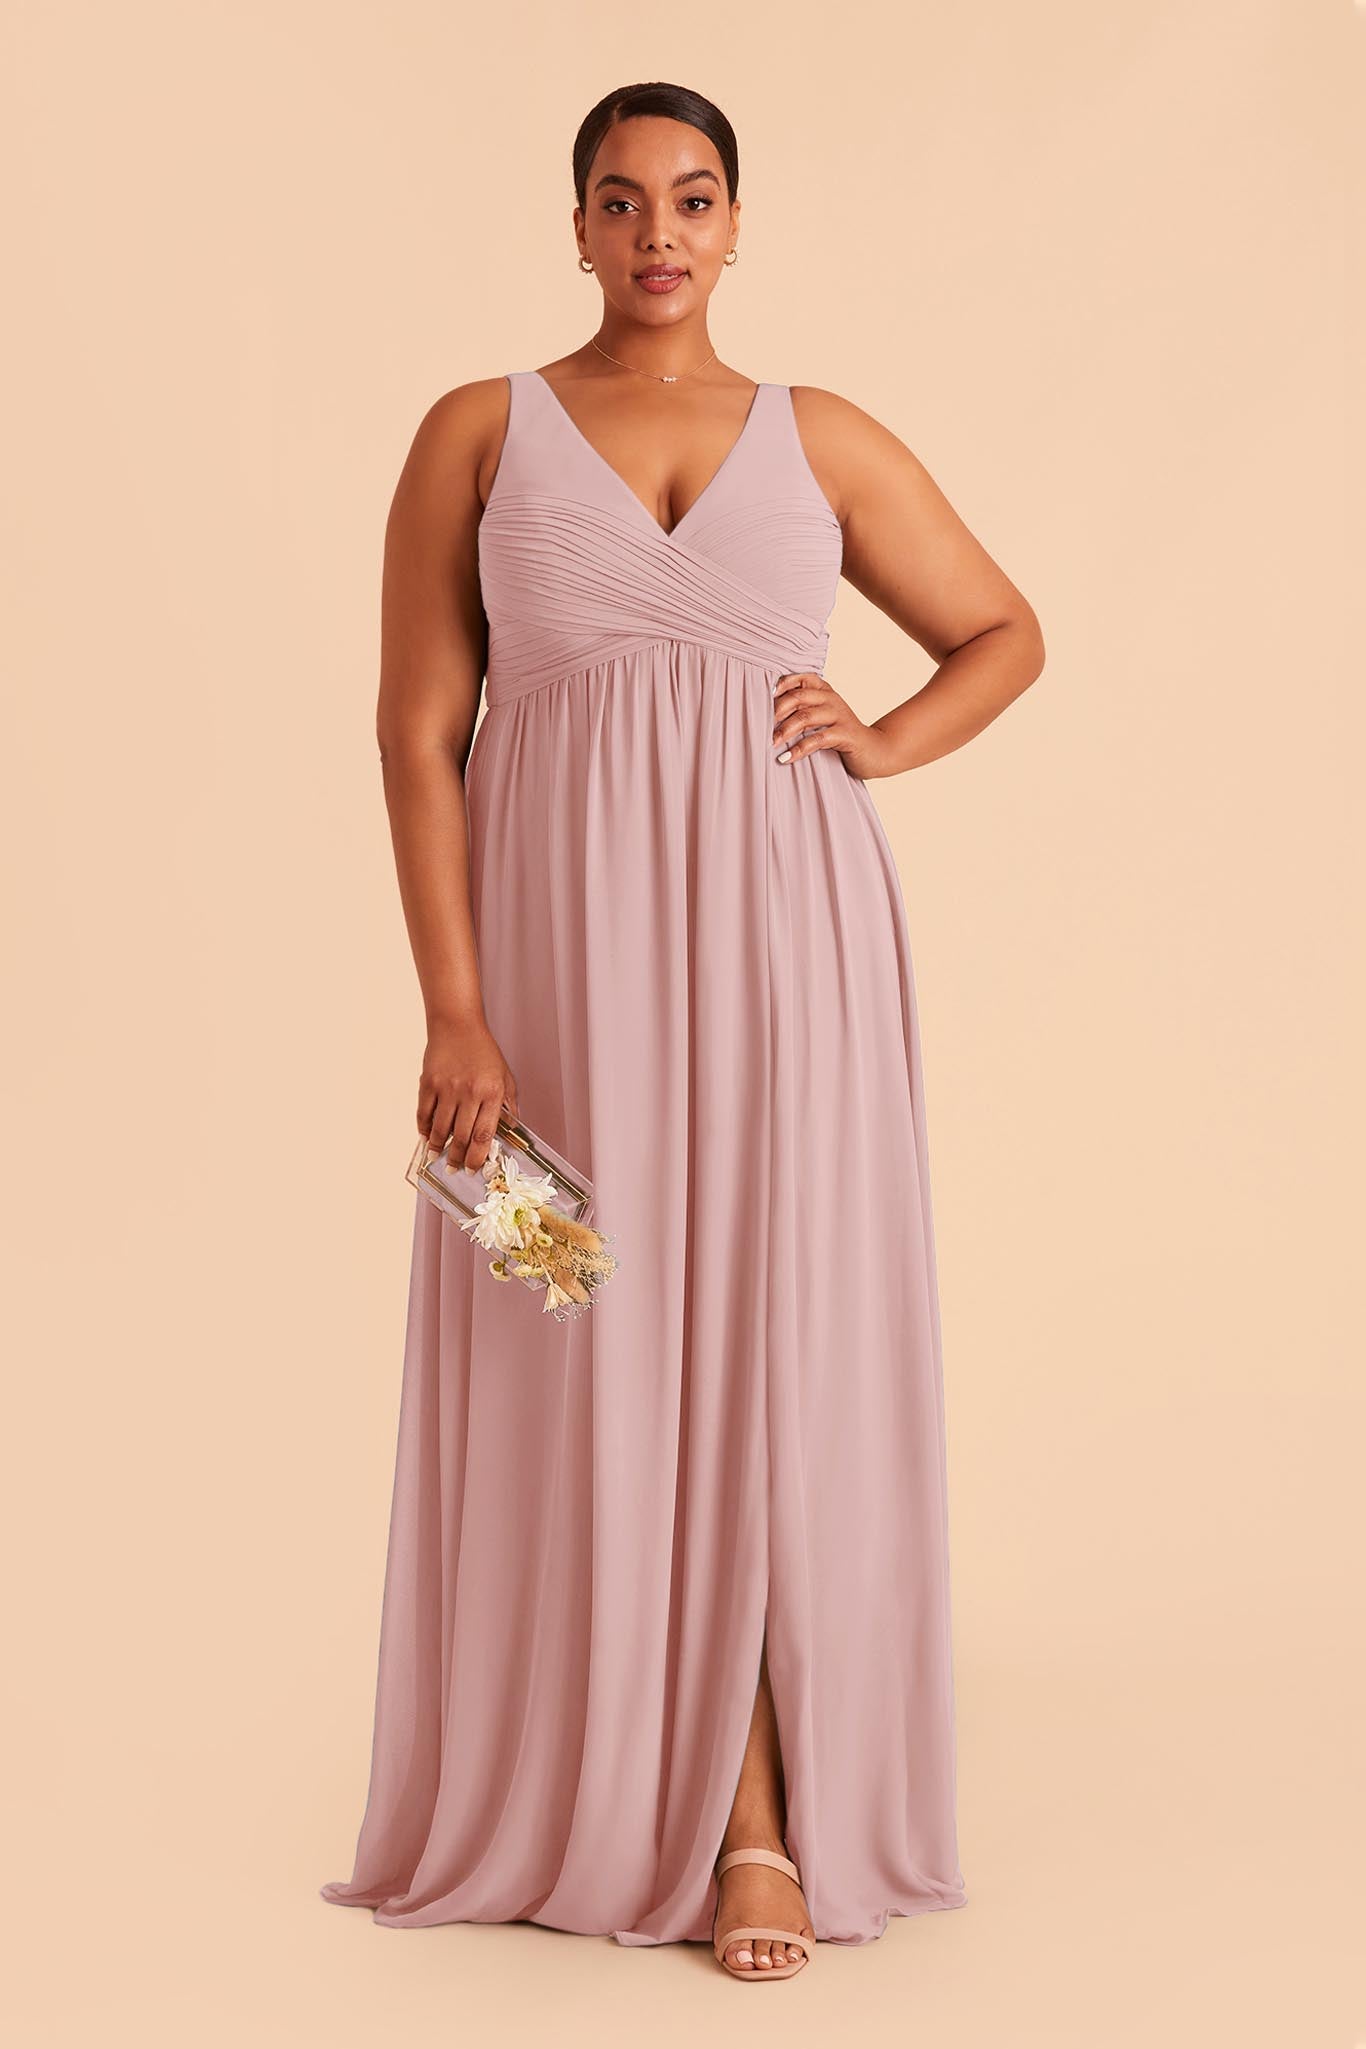 Laurie Apricot Empire Bridesmaid Dress